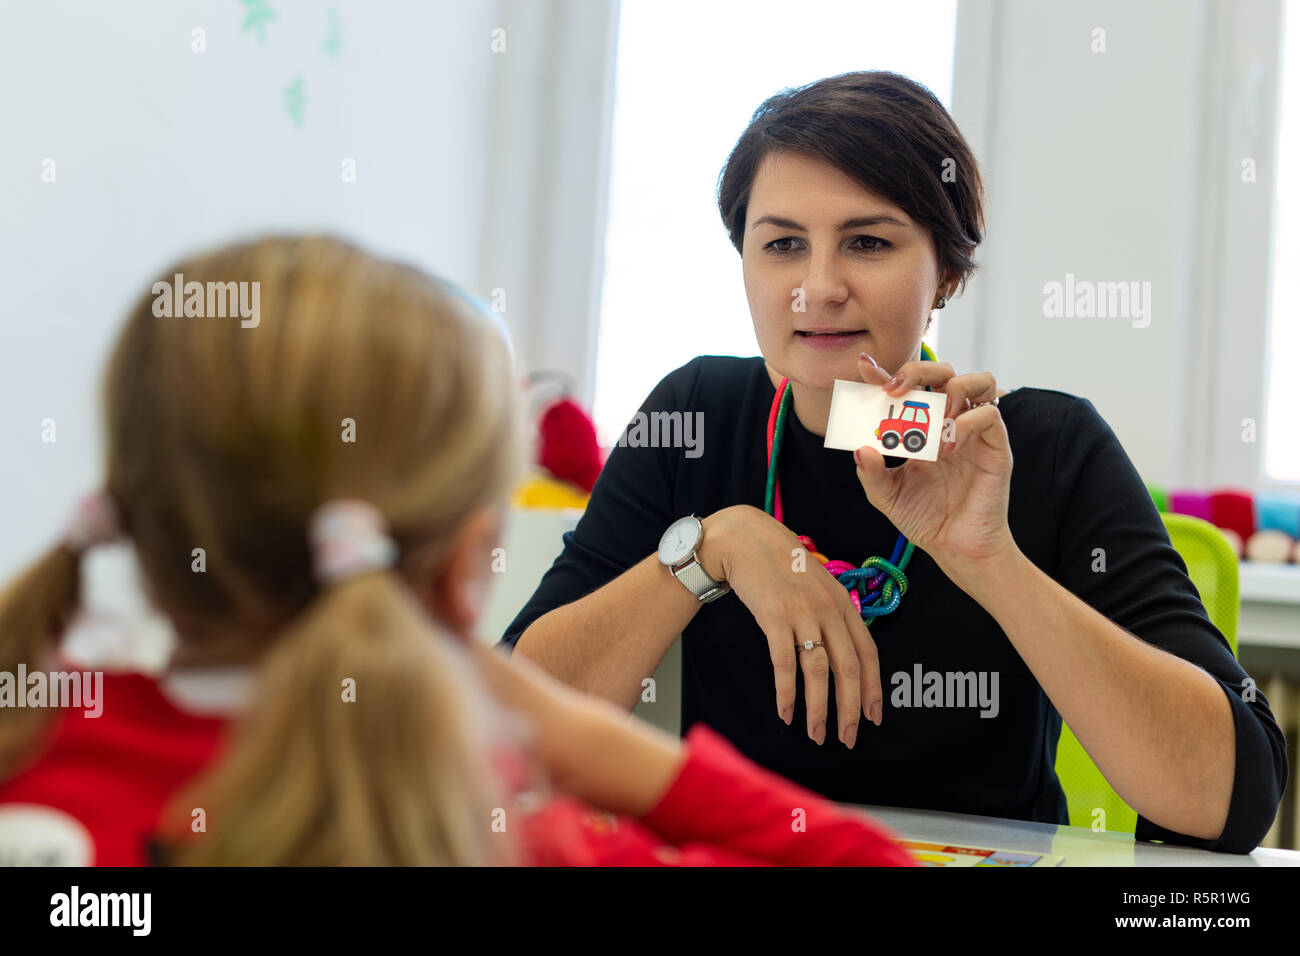 Elementary Age Girl in Child Occupational Therapy Session Doing Playful Exercises With Her Therapist. Stock Photo